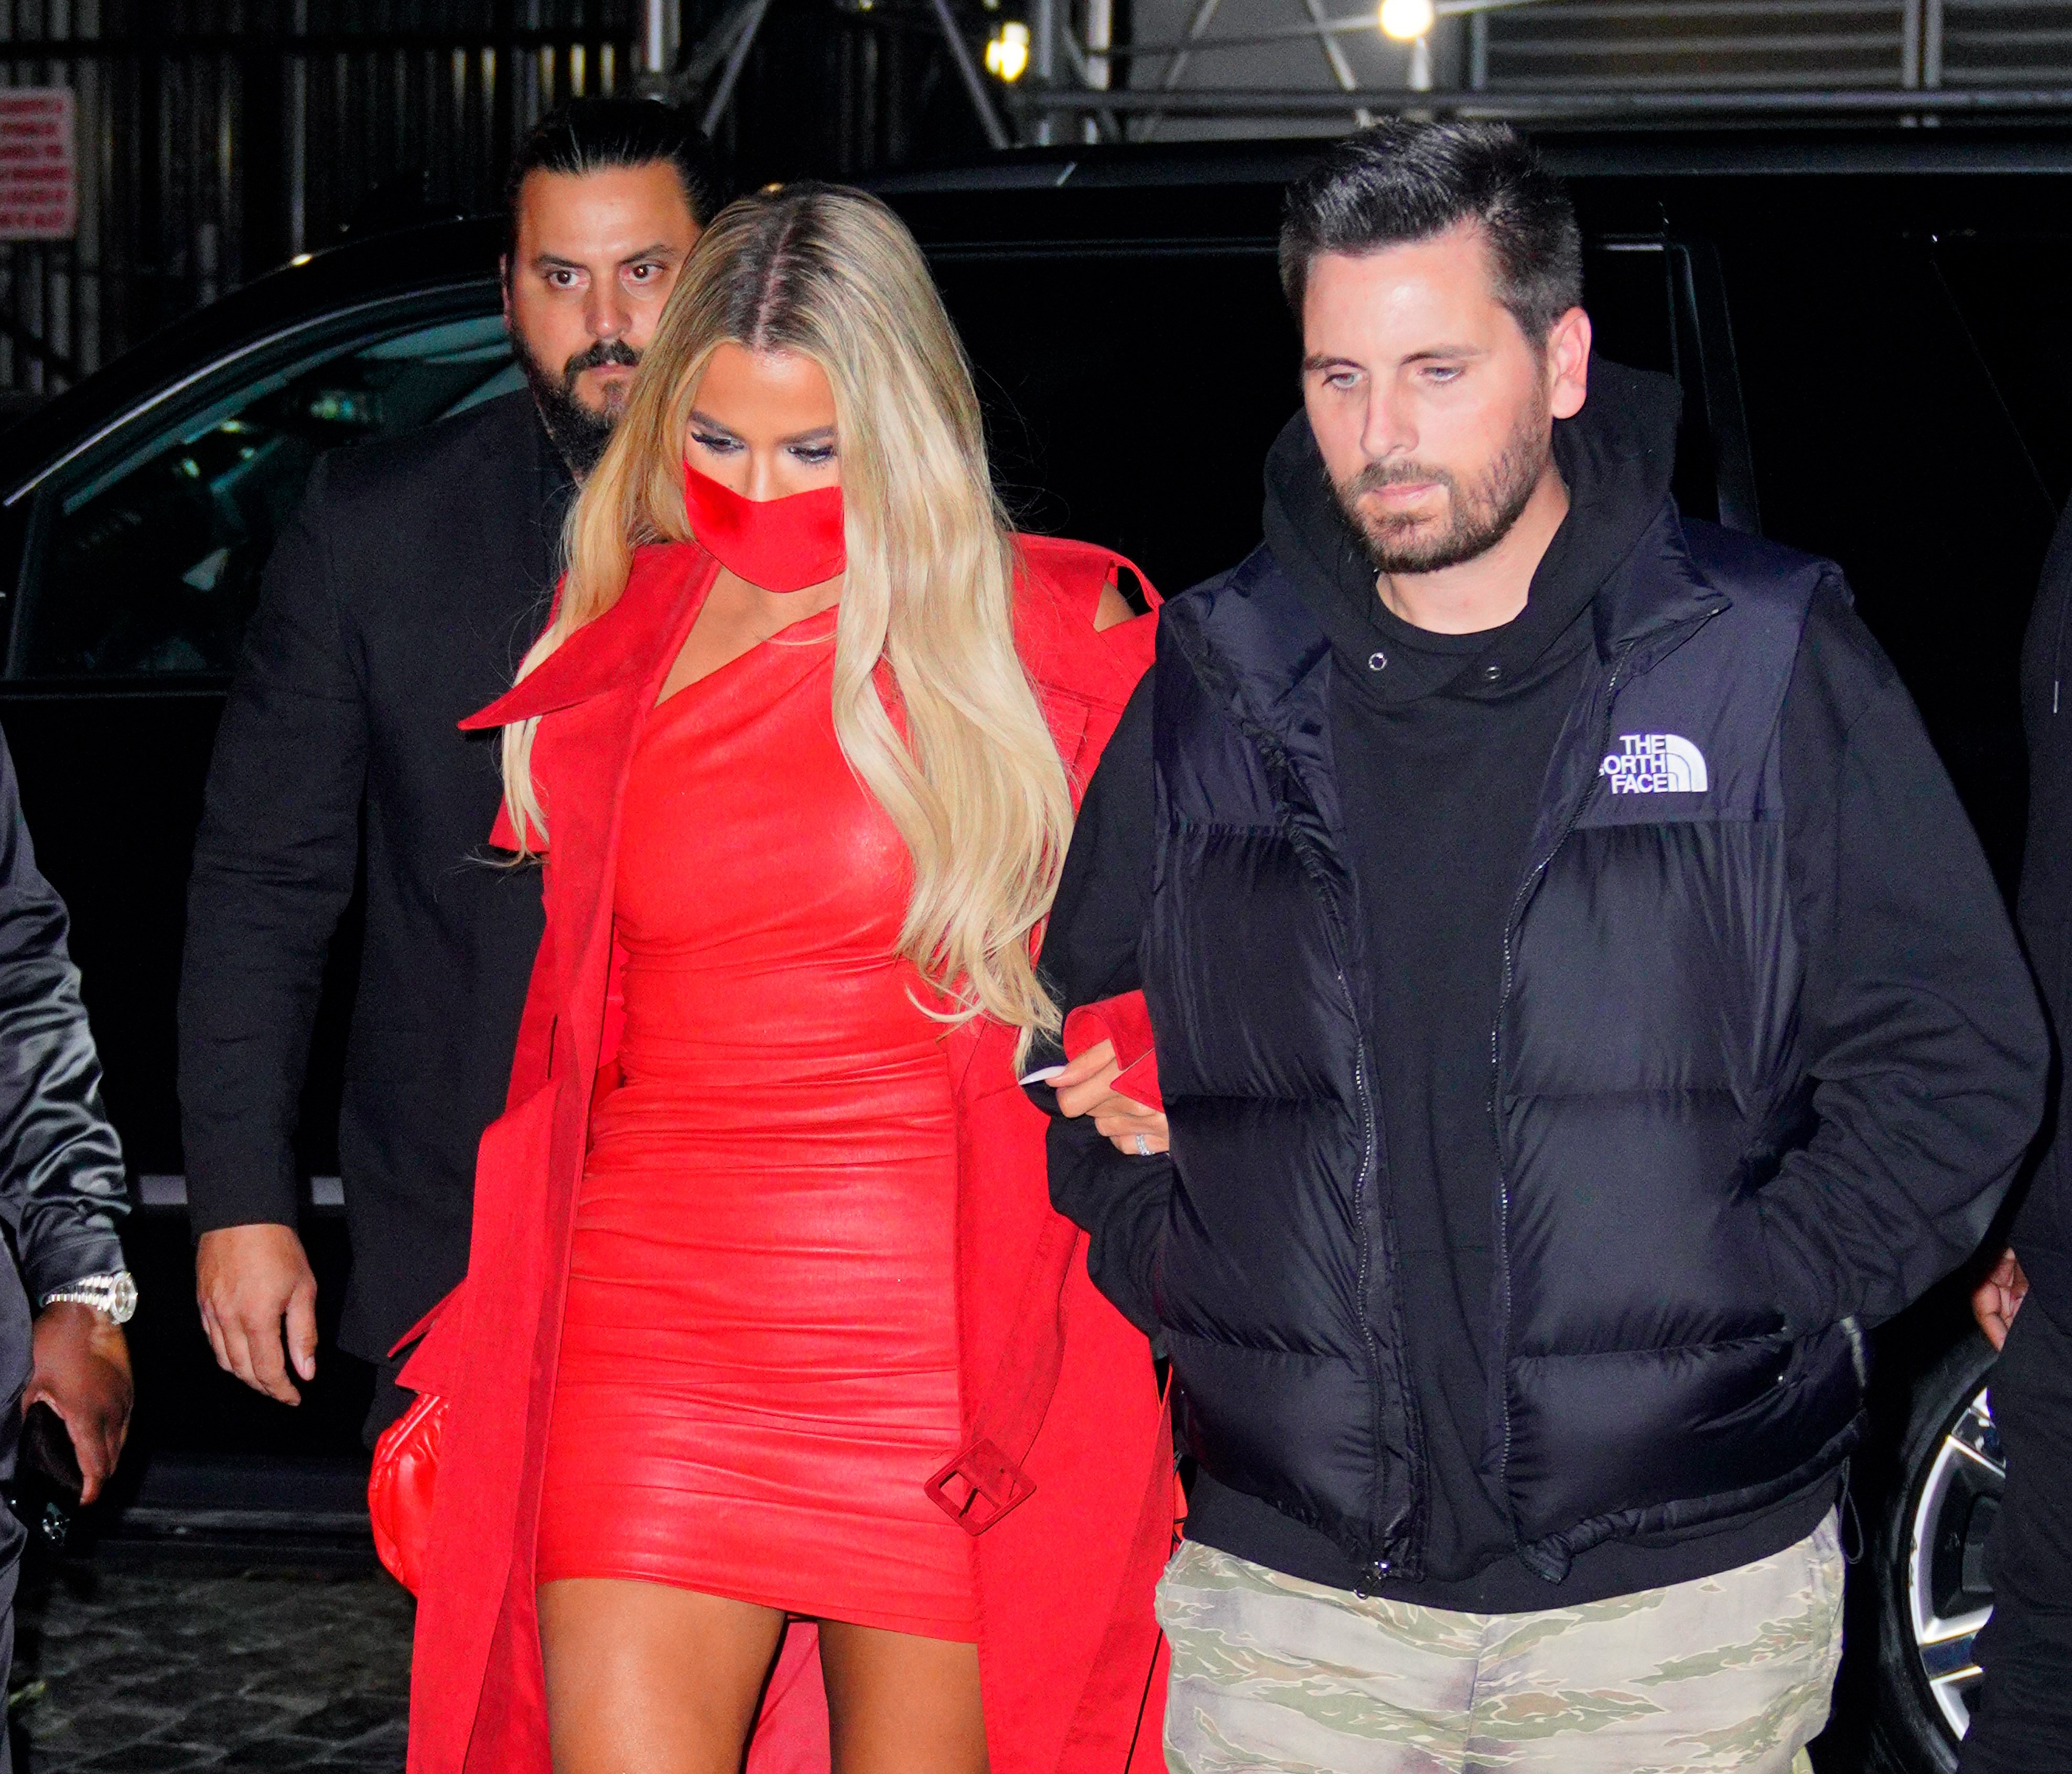 Khloé Kardashian and Scott Disick arriving together at the afterparty for 'Saturday Night Live' on Oct. 10, 2021